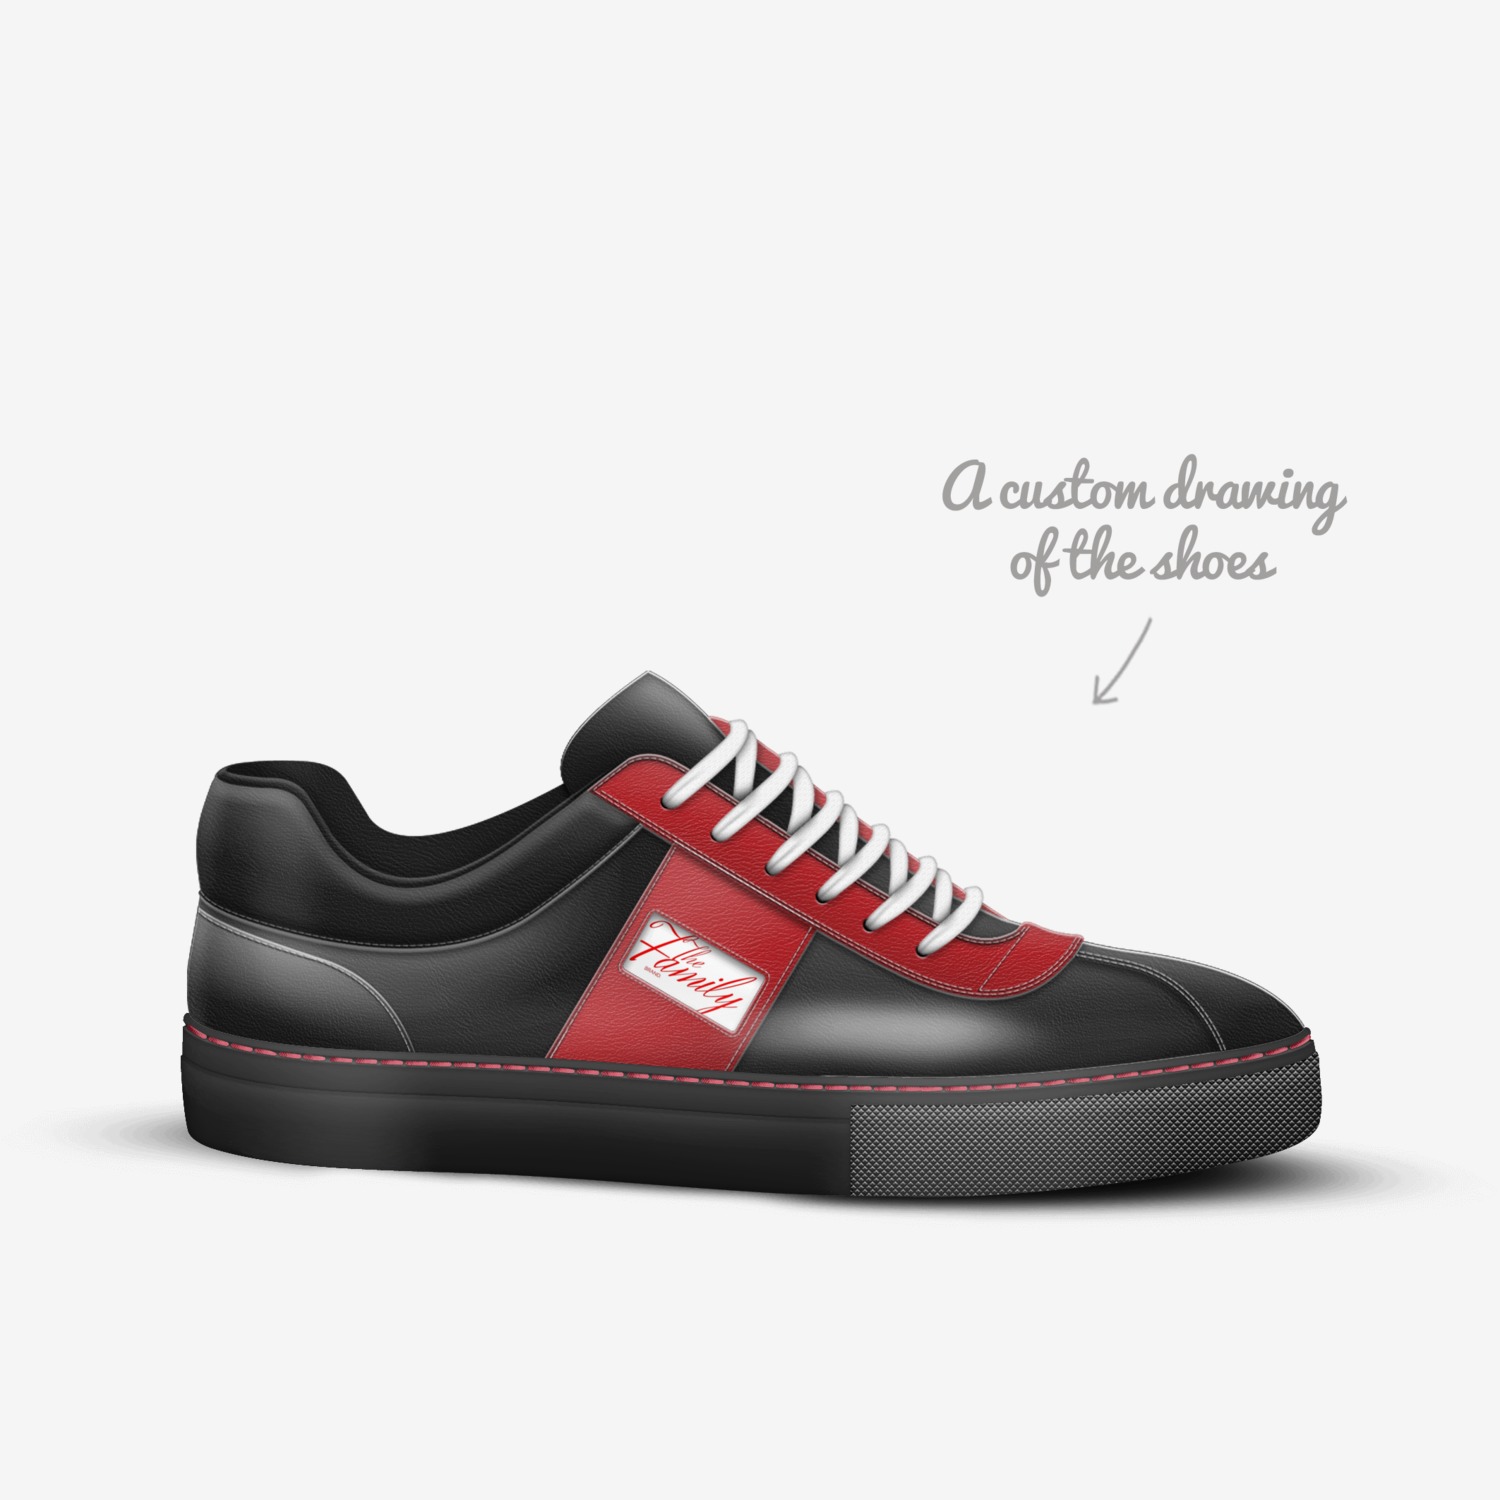 FAMILY BRAND  A Custom Shoe concept by Ashley Maurice Pearson